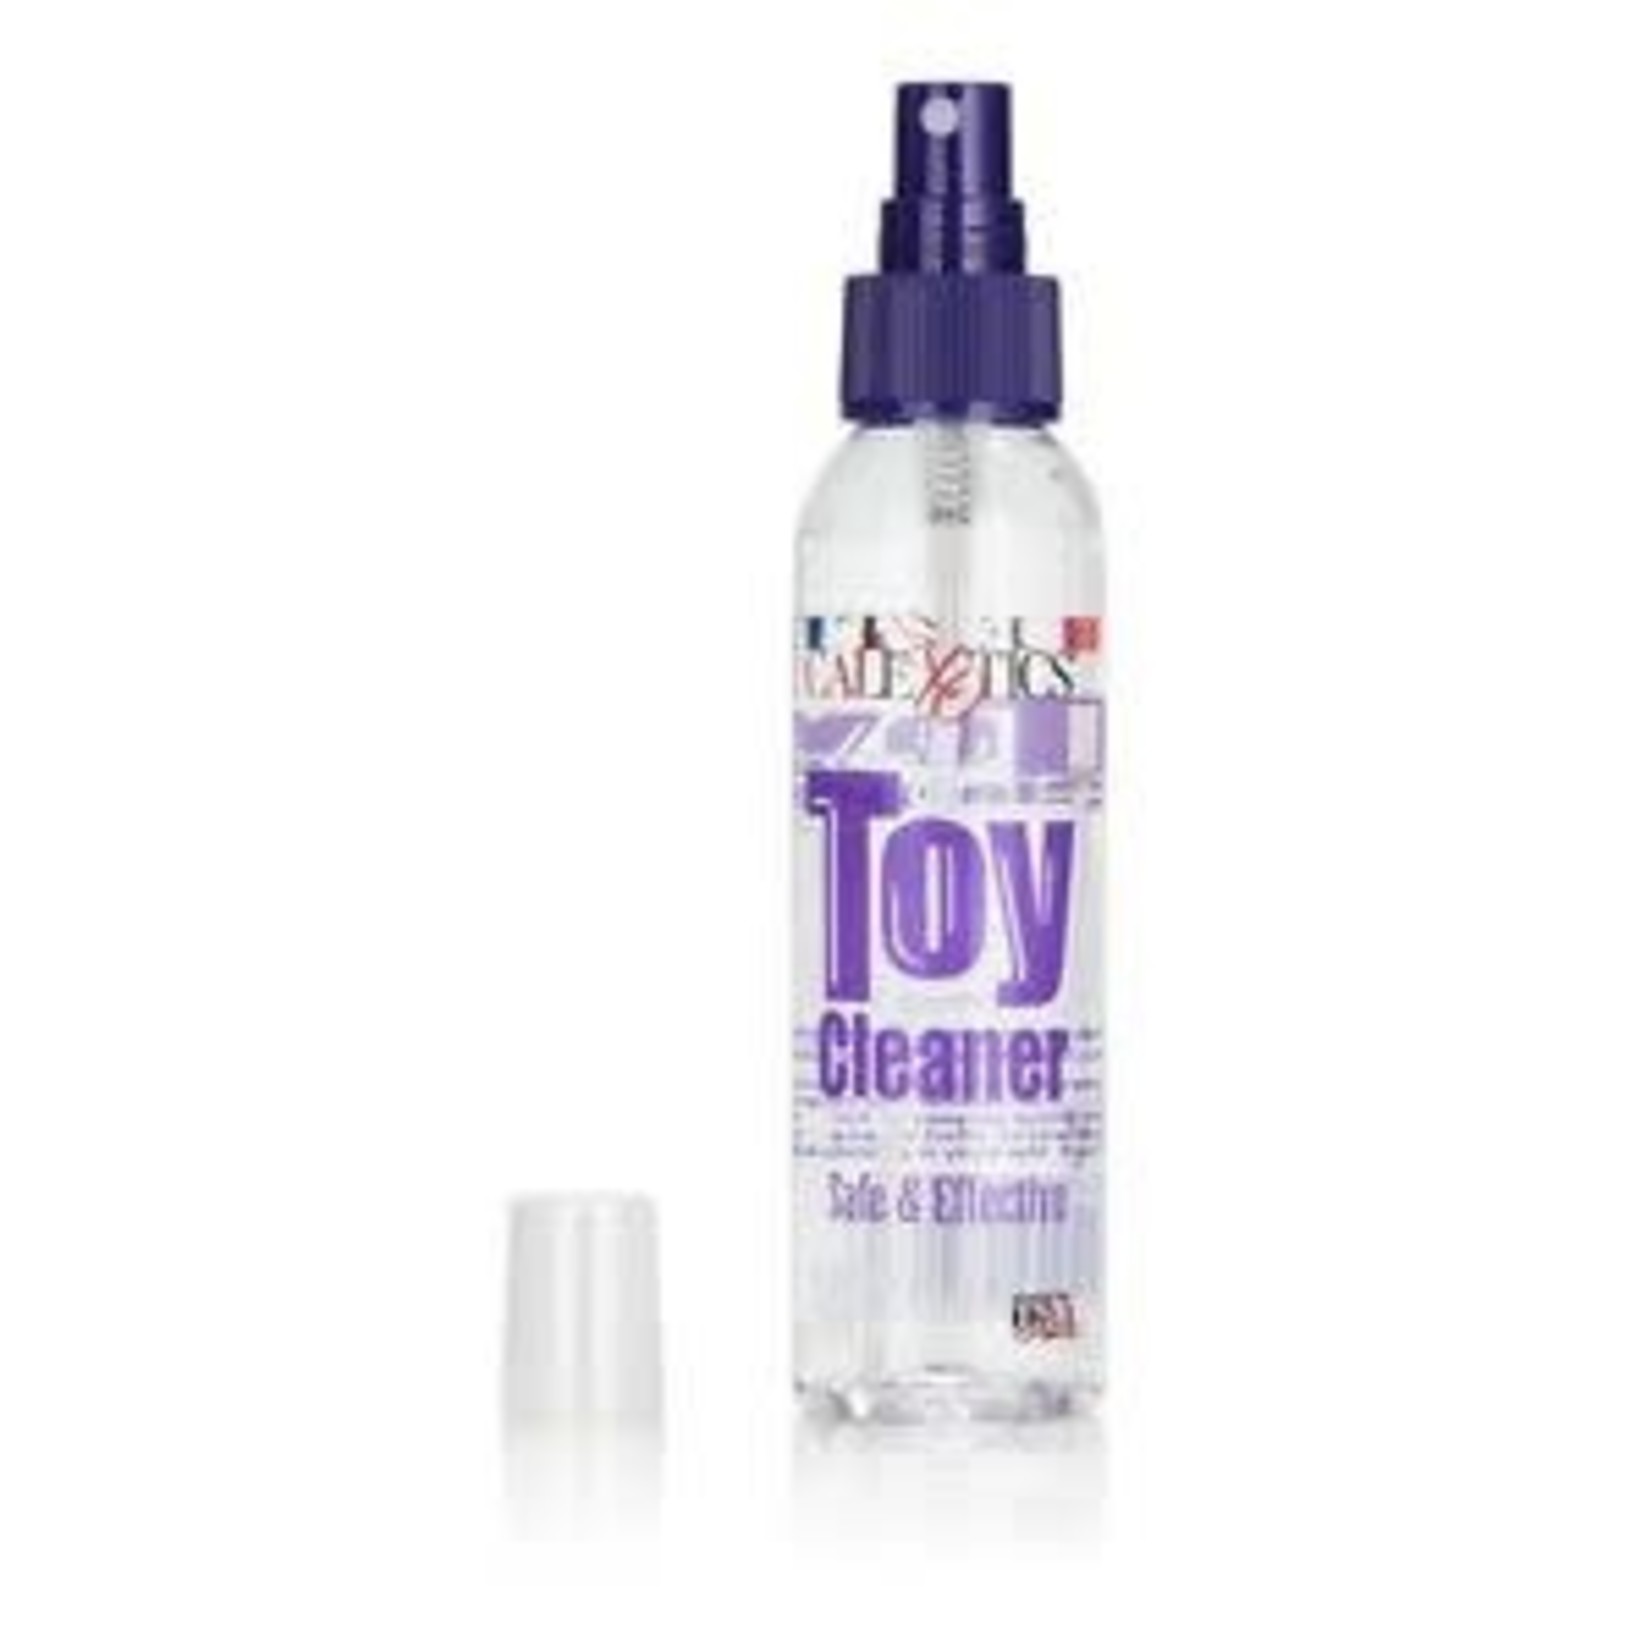 CALEXOTICS ANTI BACTERIAL TOY CLEANER - 4.3 OZ